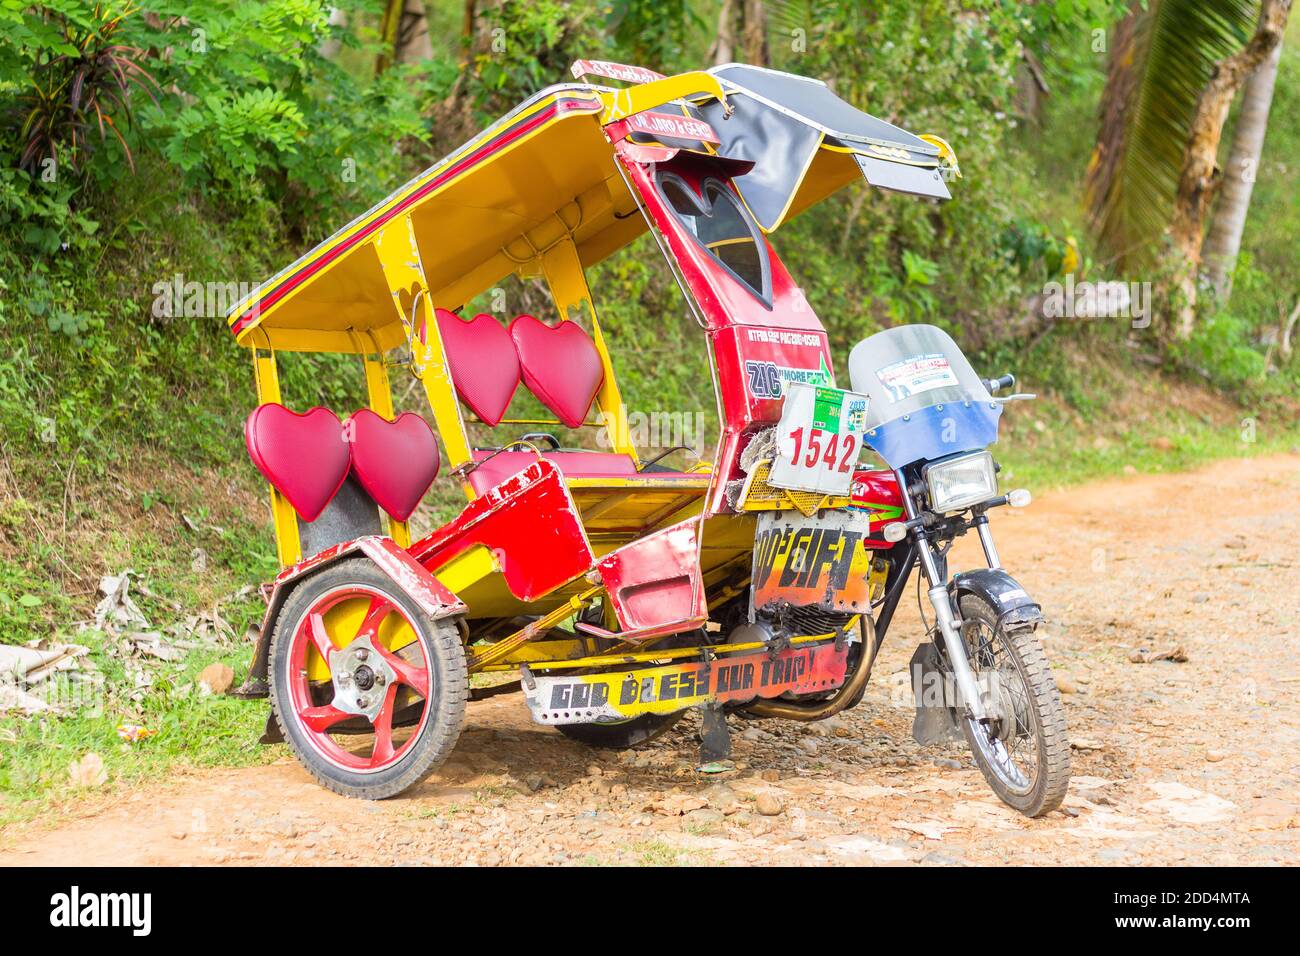 A custom built tricycle, a local passenger vehicle in Mindanao, Philippines Stock Photo